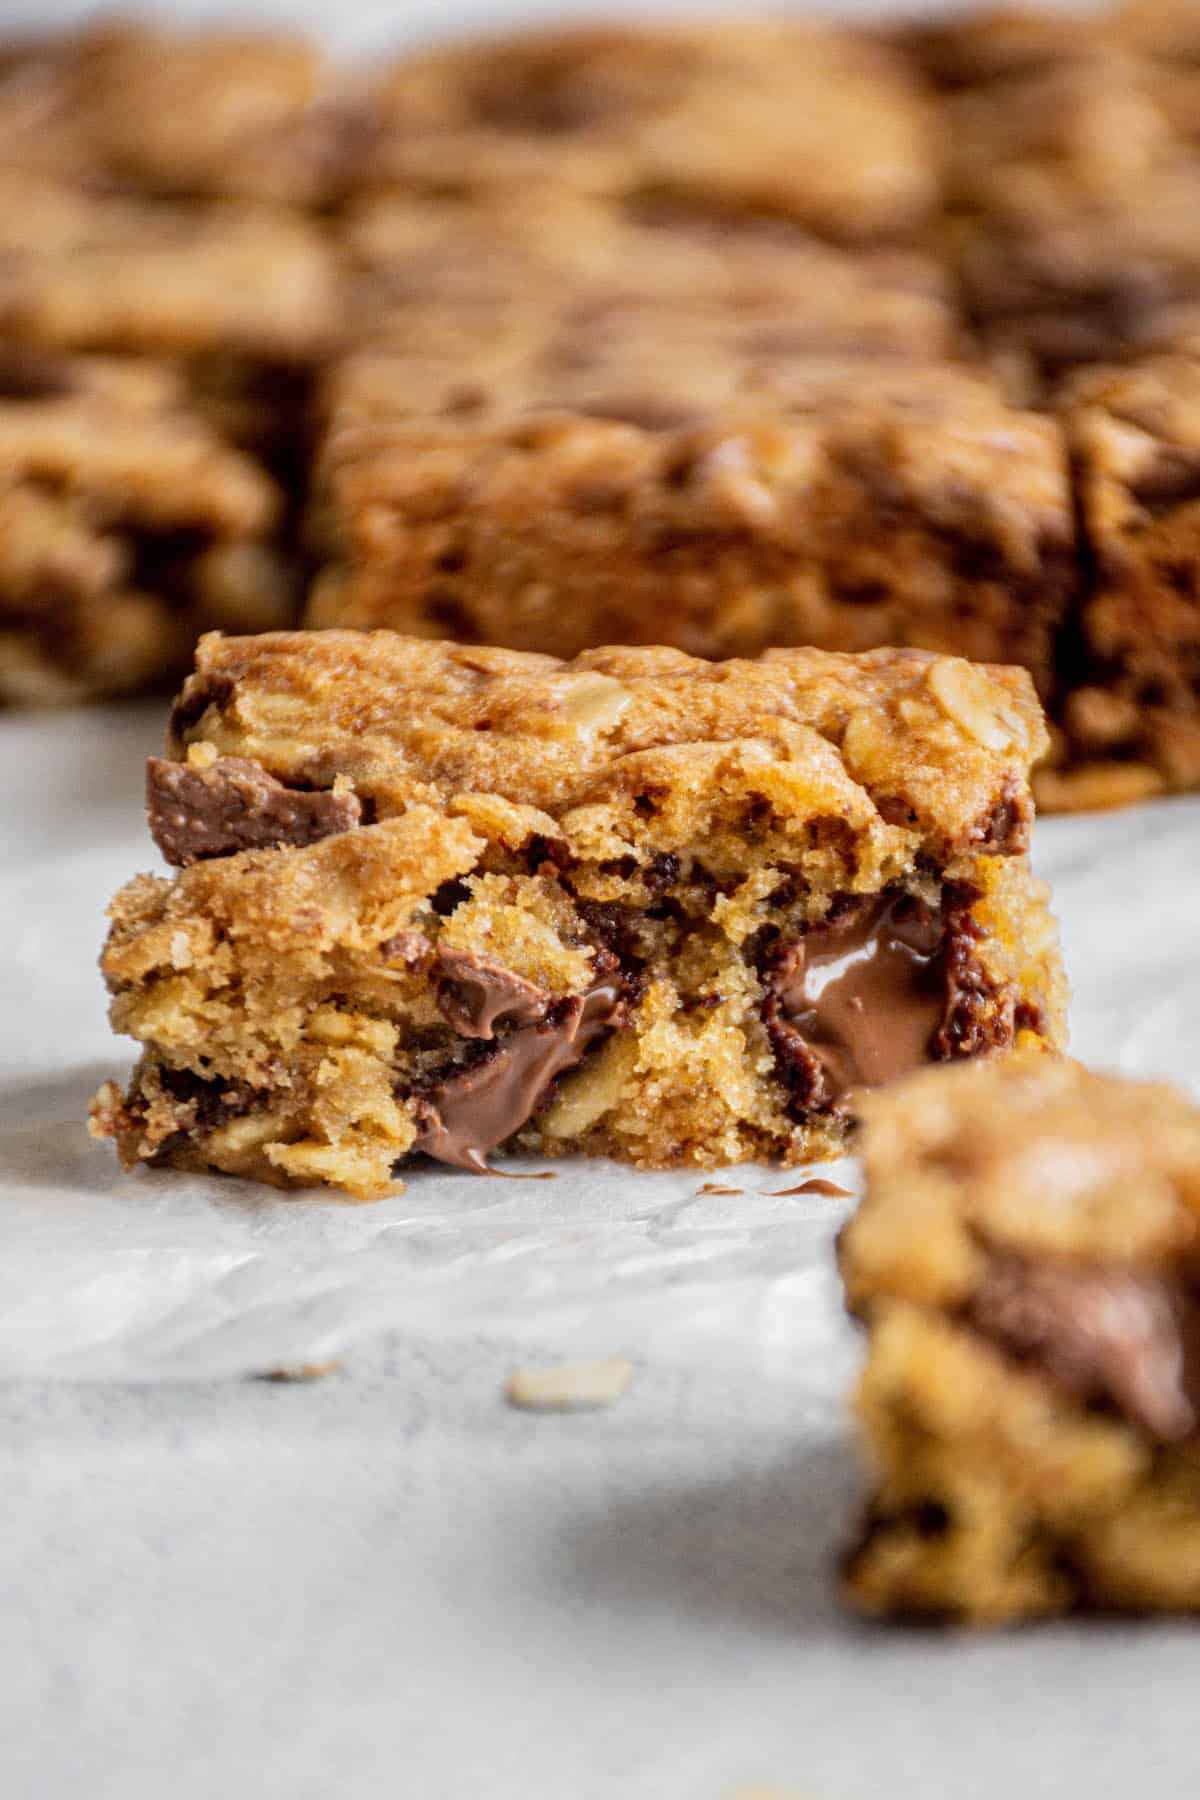 melted chocolate oat cookie bar.